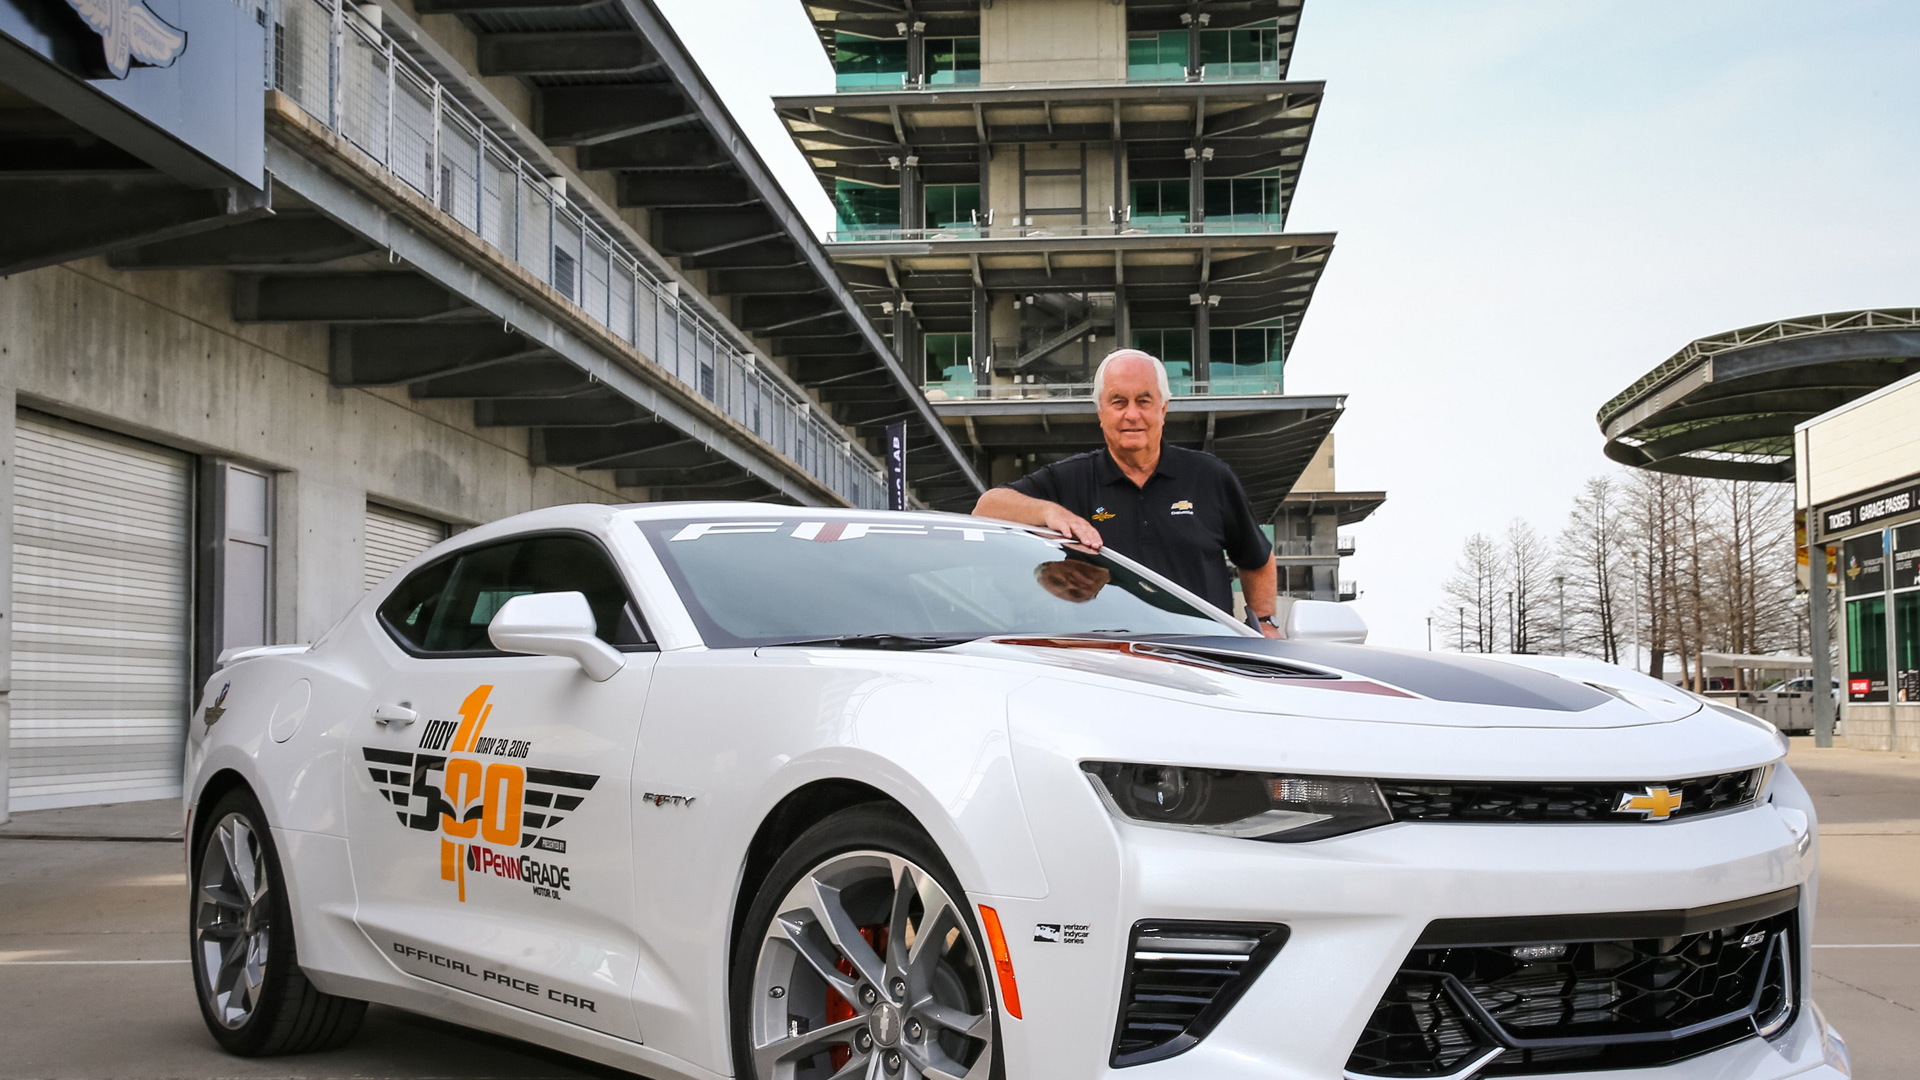 2017 Chevrolet Camaro SS 50th Anniversary Edition pace car for the 2016 Indianapolis 500